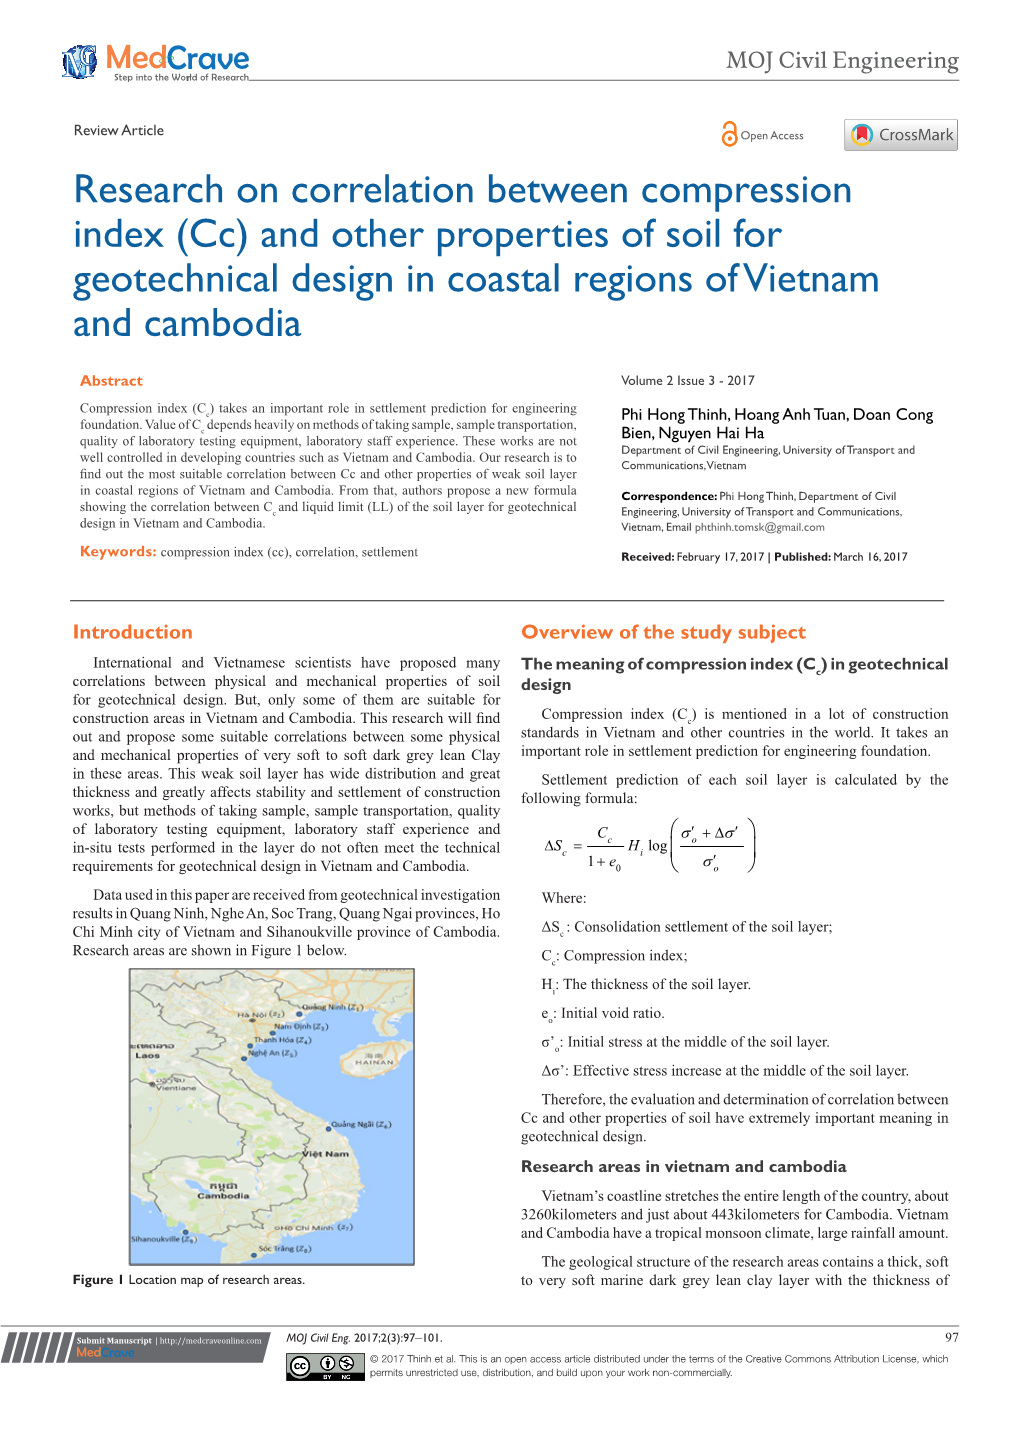 Research on Correlation Between Compression Index (Cc) and Other Properties of Soil for Geotechnical Design in Coastal Regions of Vietnam and Cambodia